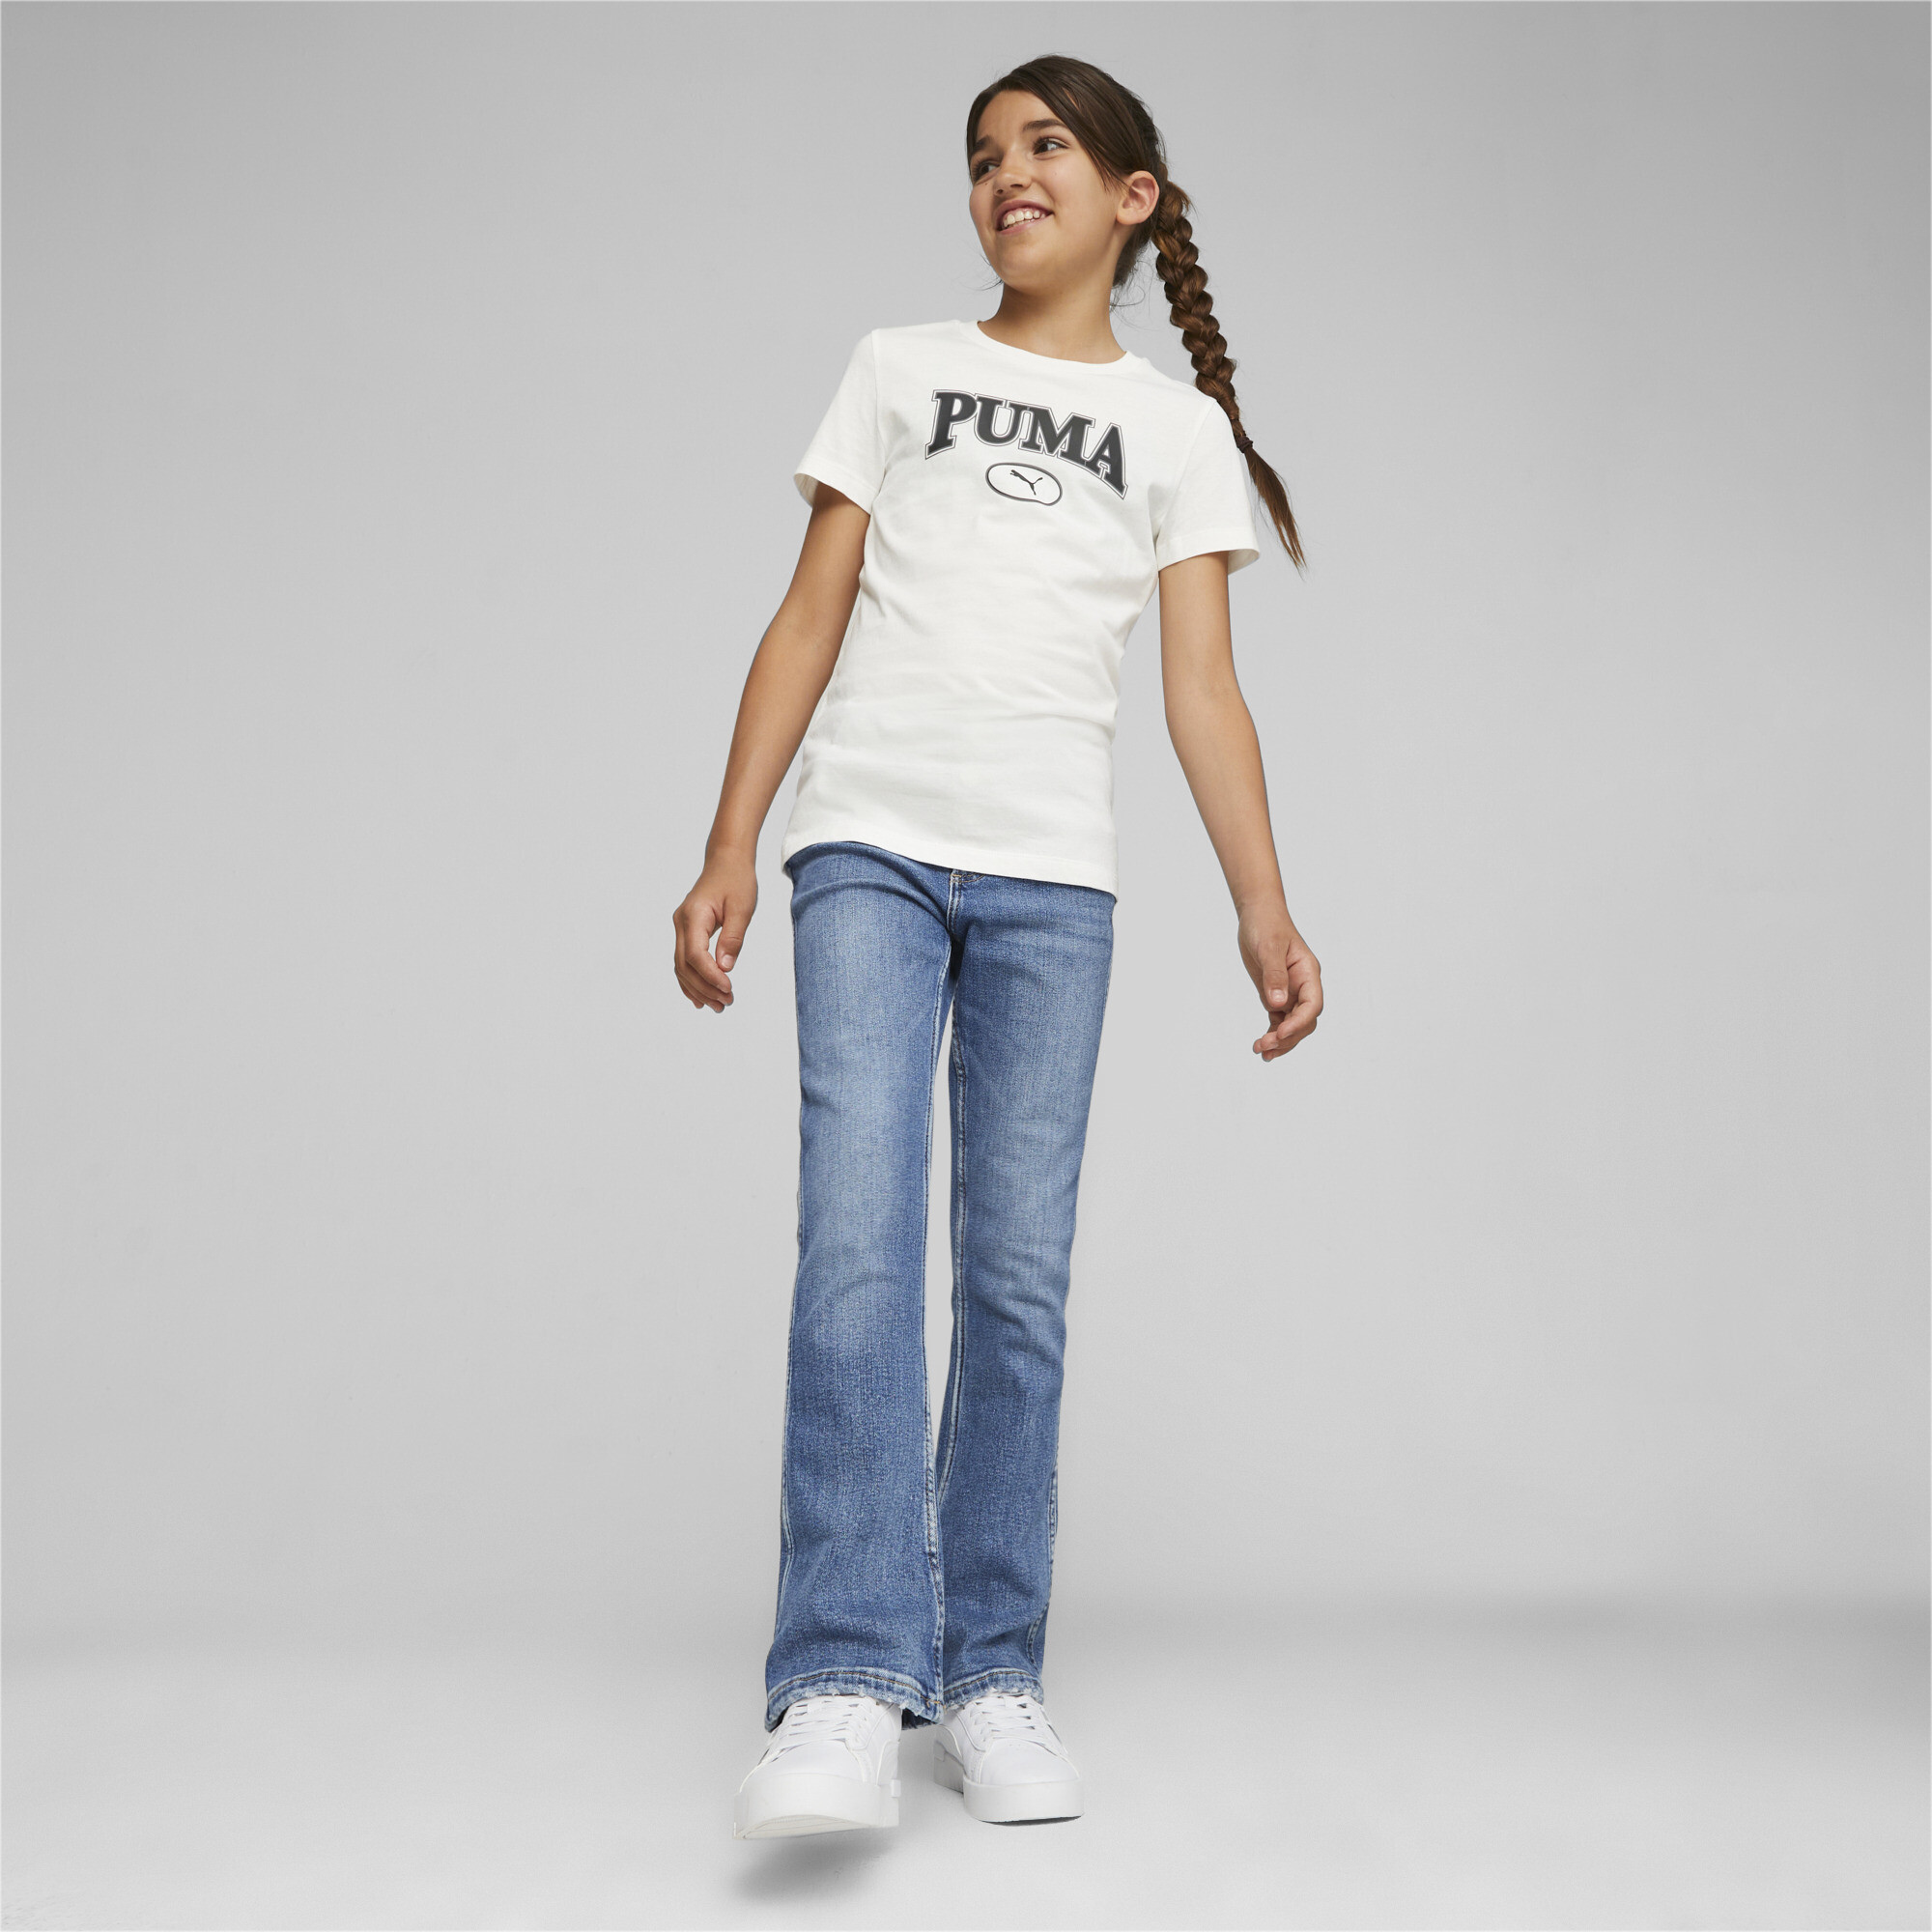 PUMA SQUAD Graphic T-Shirt In White, Size 11-12 Youth